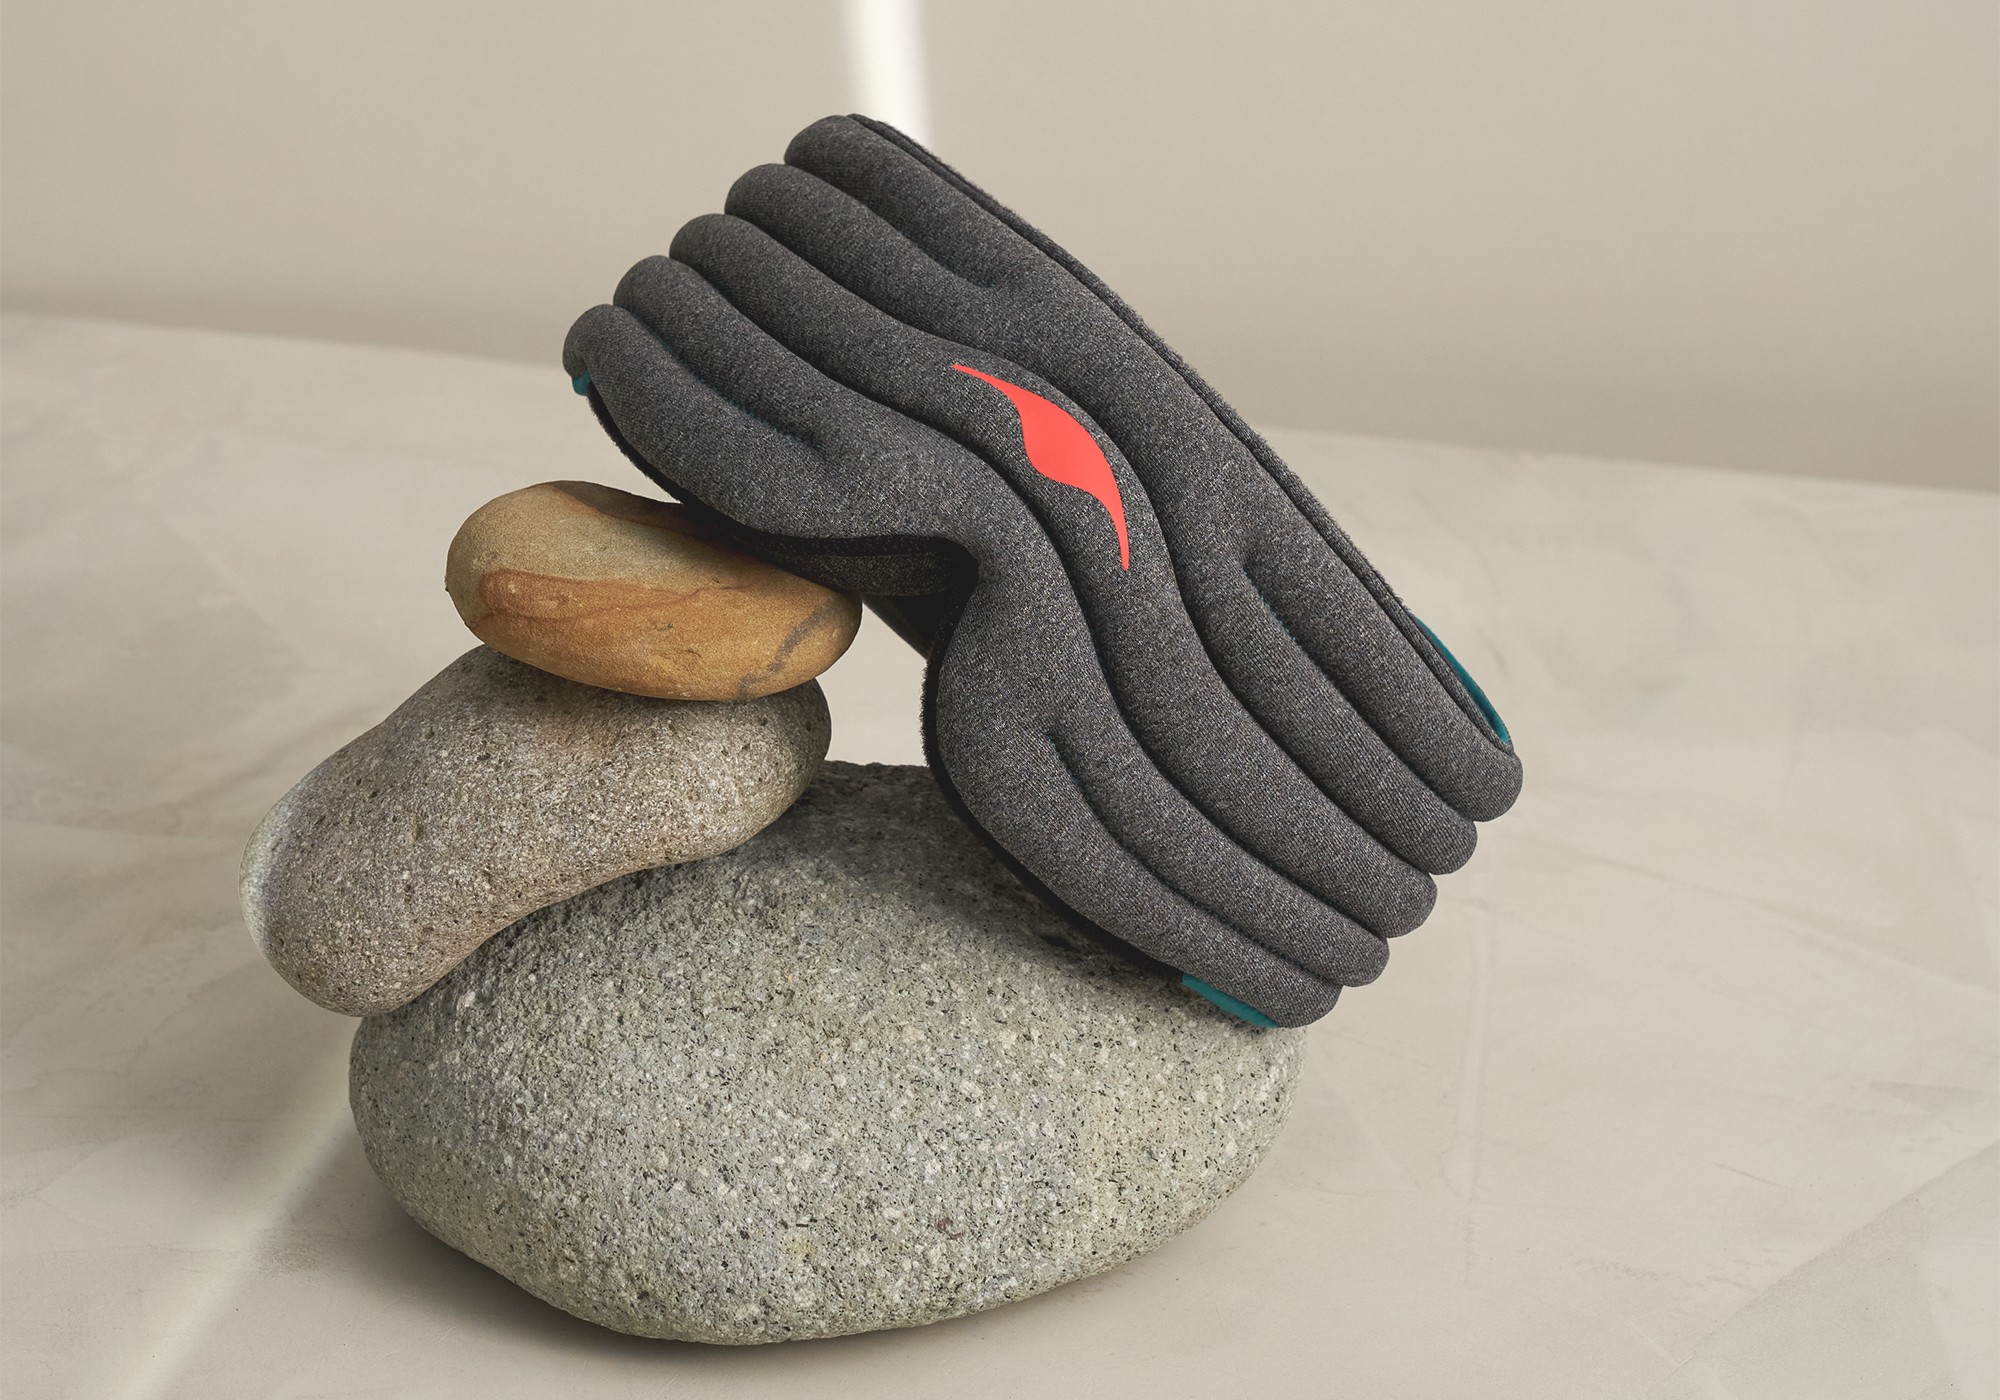 A gray weighted sleep mask resting on 3 pebbles of different sizes.